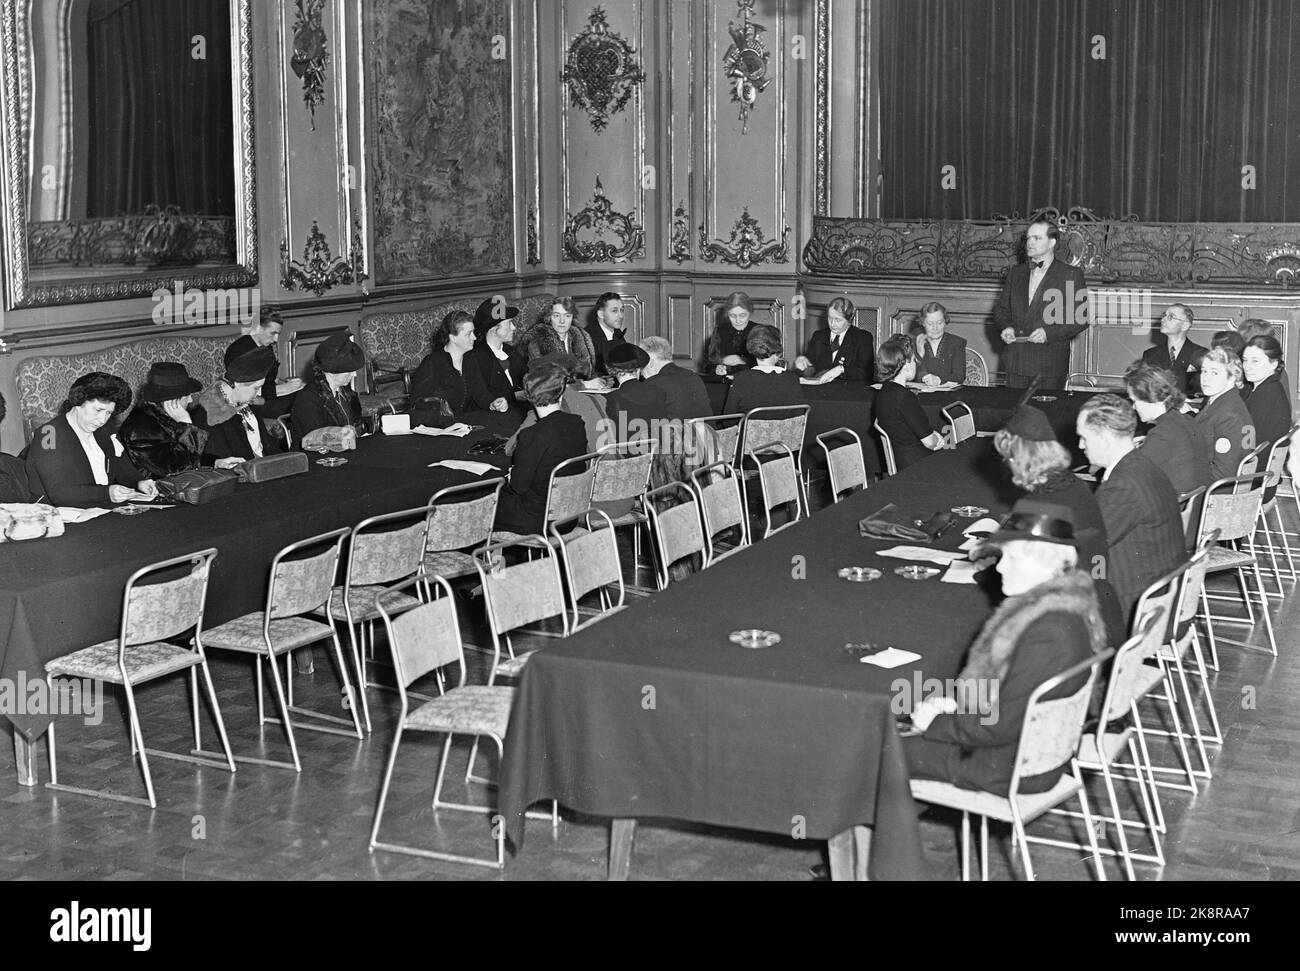 WW2 Oslo 19411202 N.S.K.'s meeting in the Rococo room, Grand Hotel. NS ...